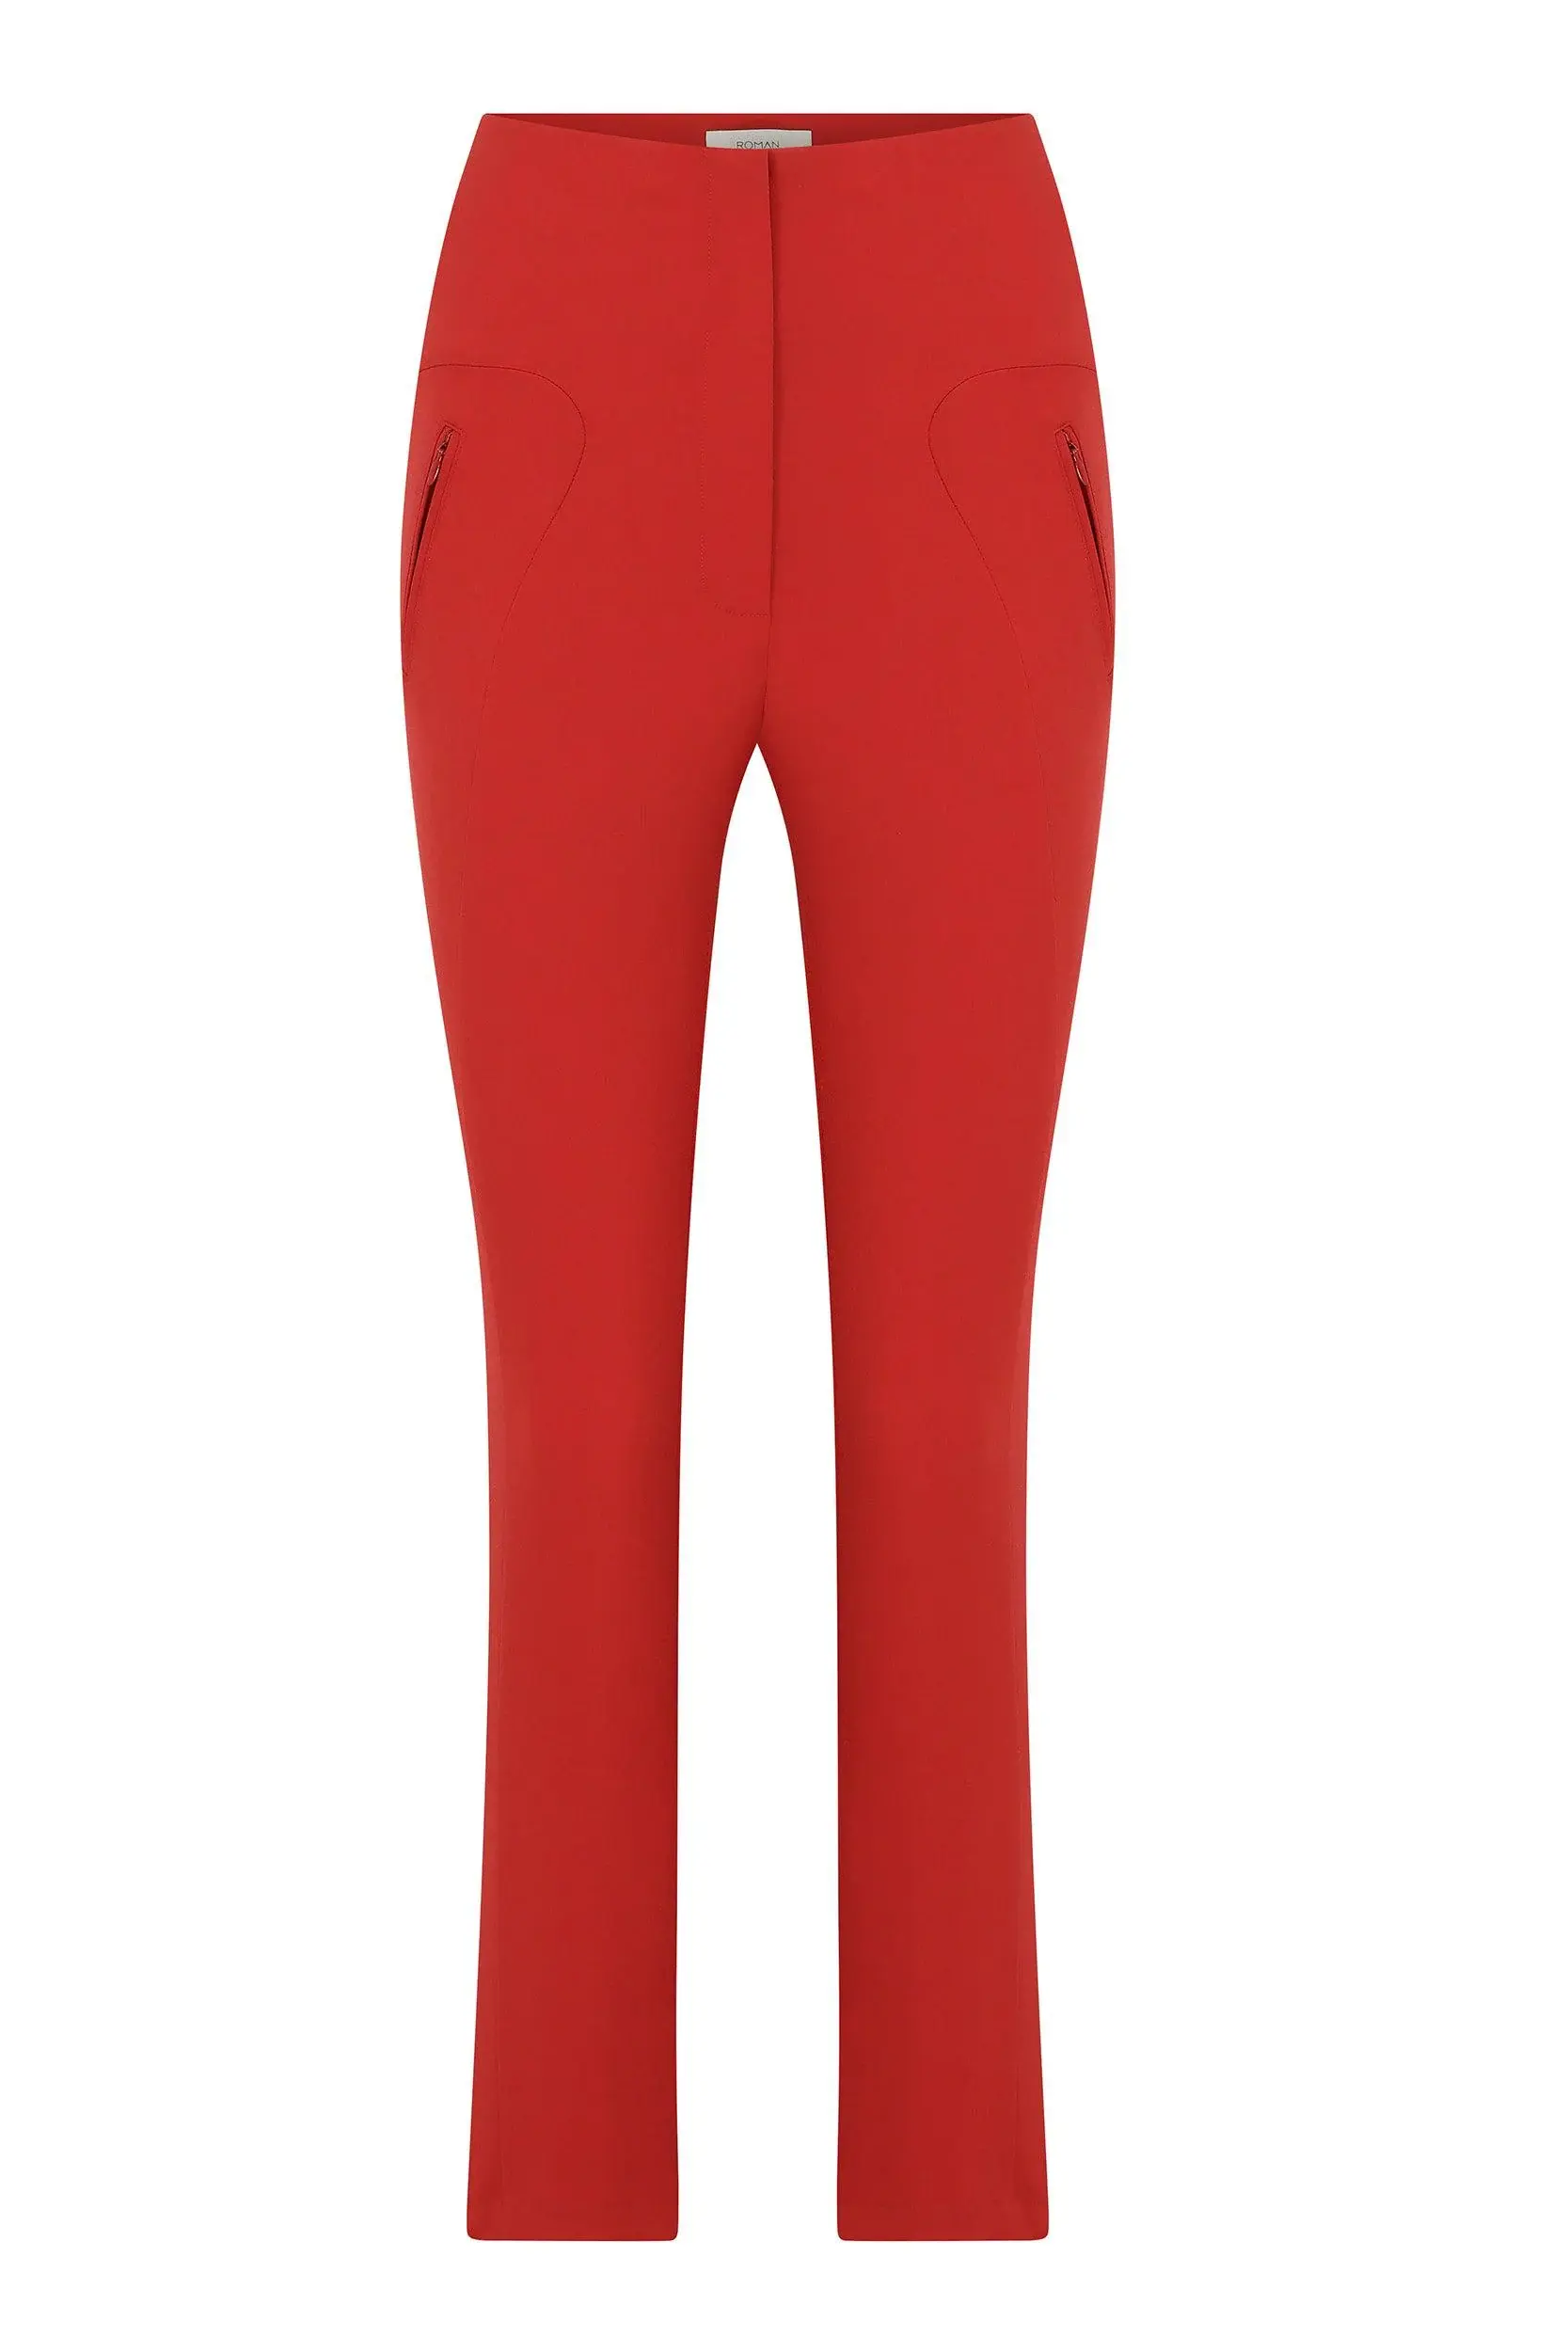 Roman Hip Red Skinny Casual Trousers. 2